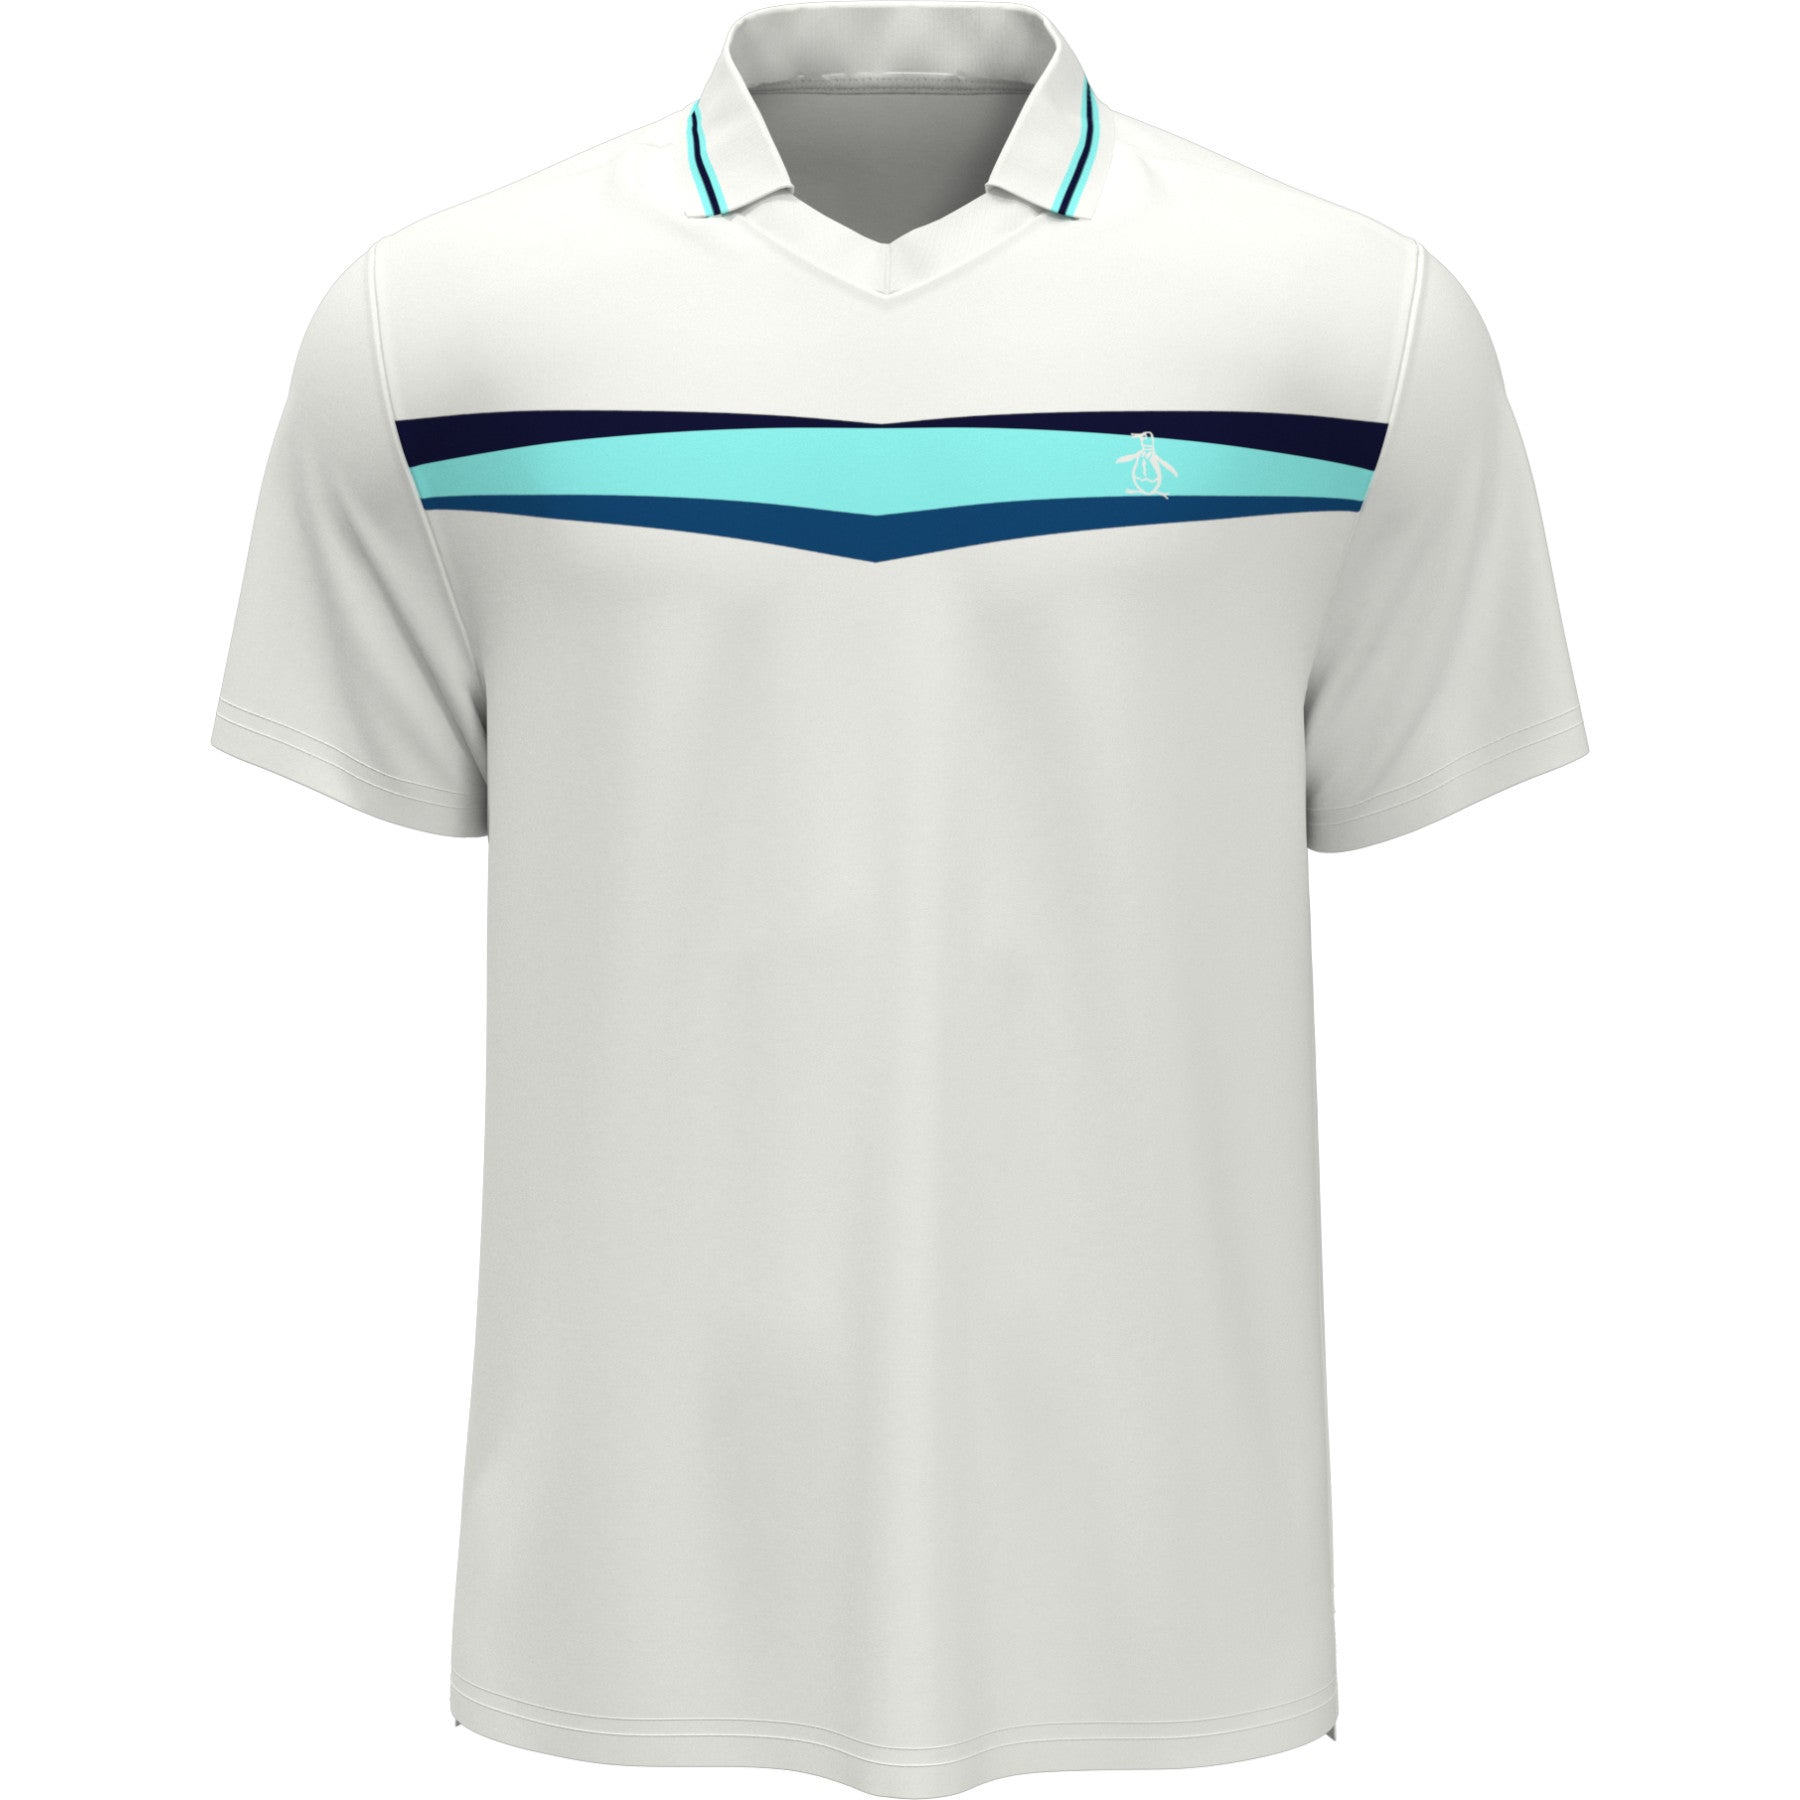 View Performance Heritage Print Tennis Polo In Bright White information